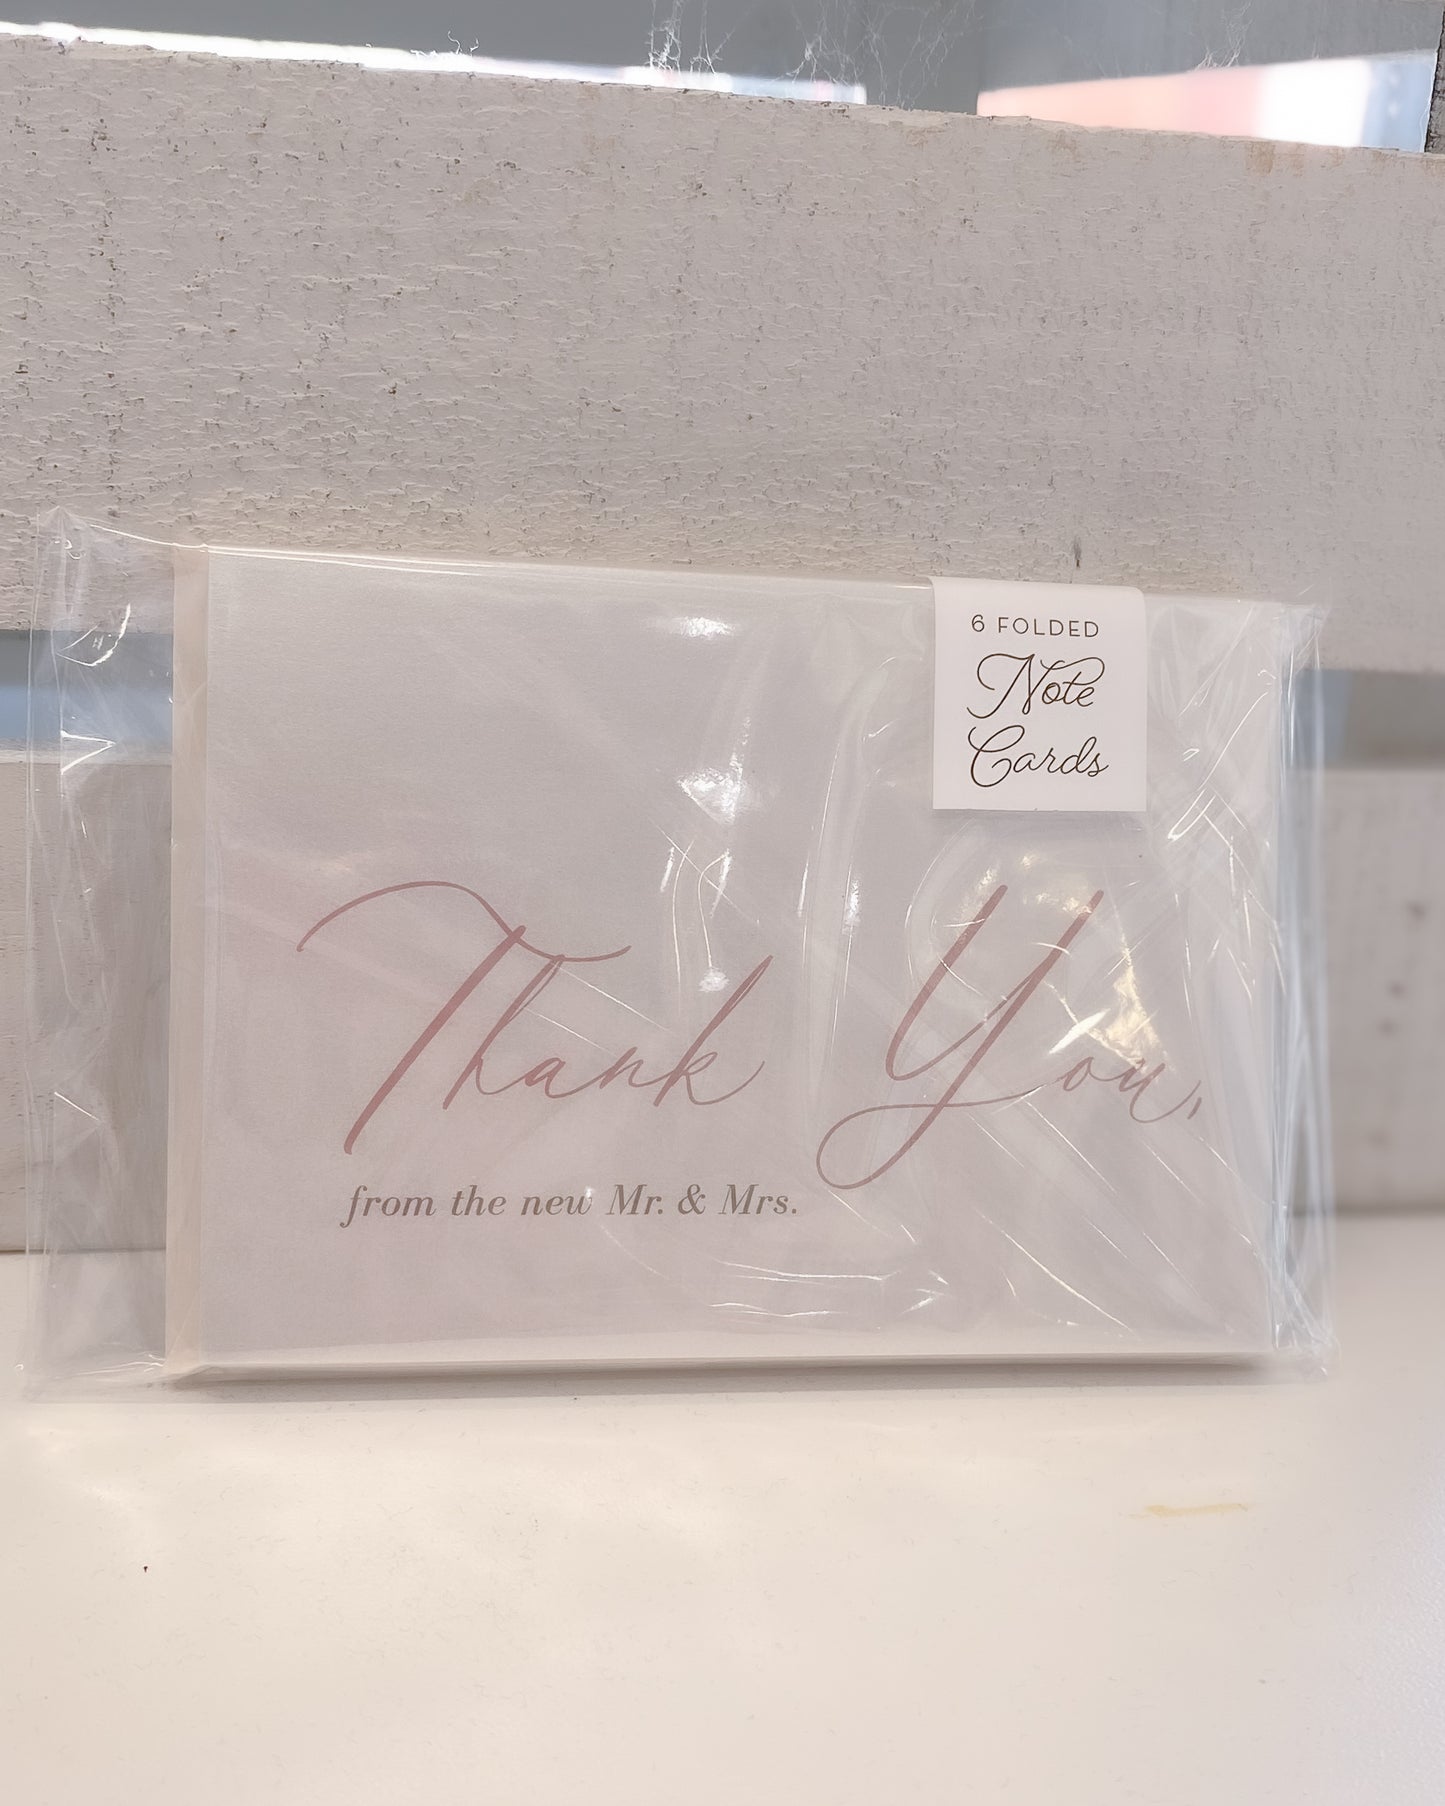 Thank You from the new Mr. & Mrs.